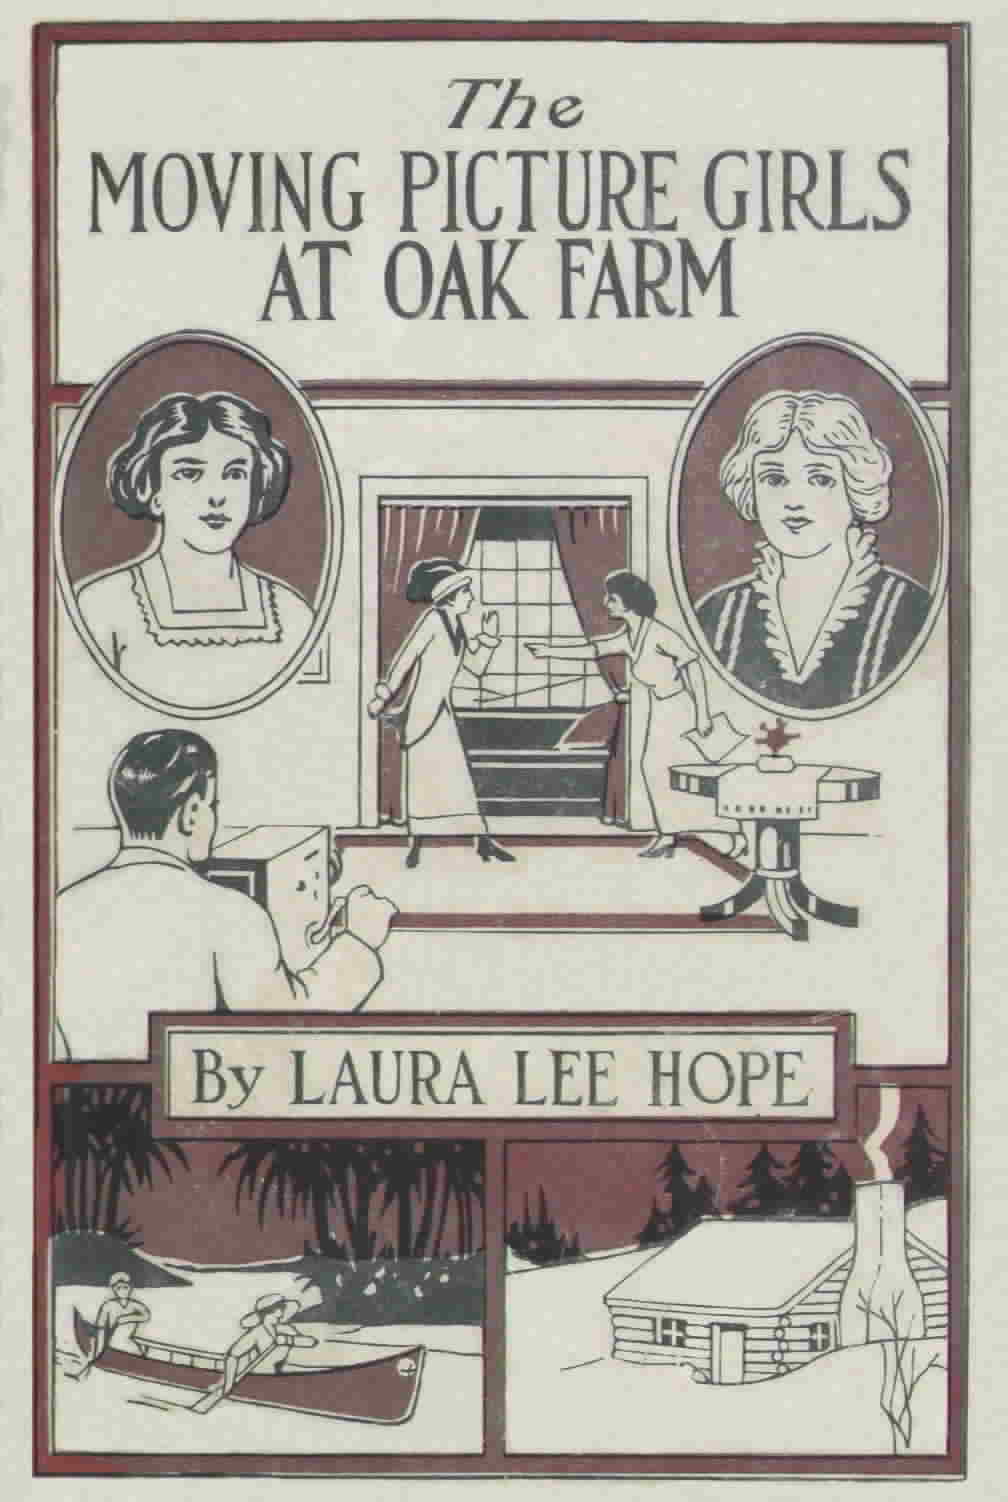 2. The Moving Picture Girls at Oak Farm